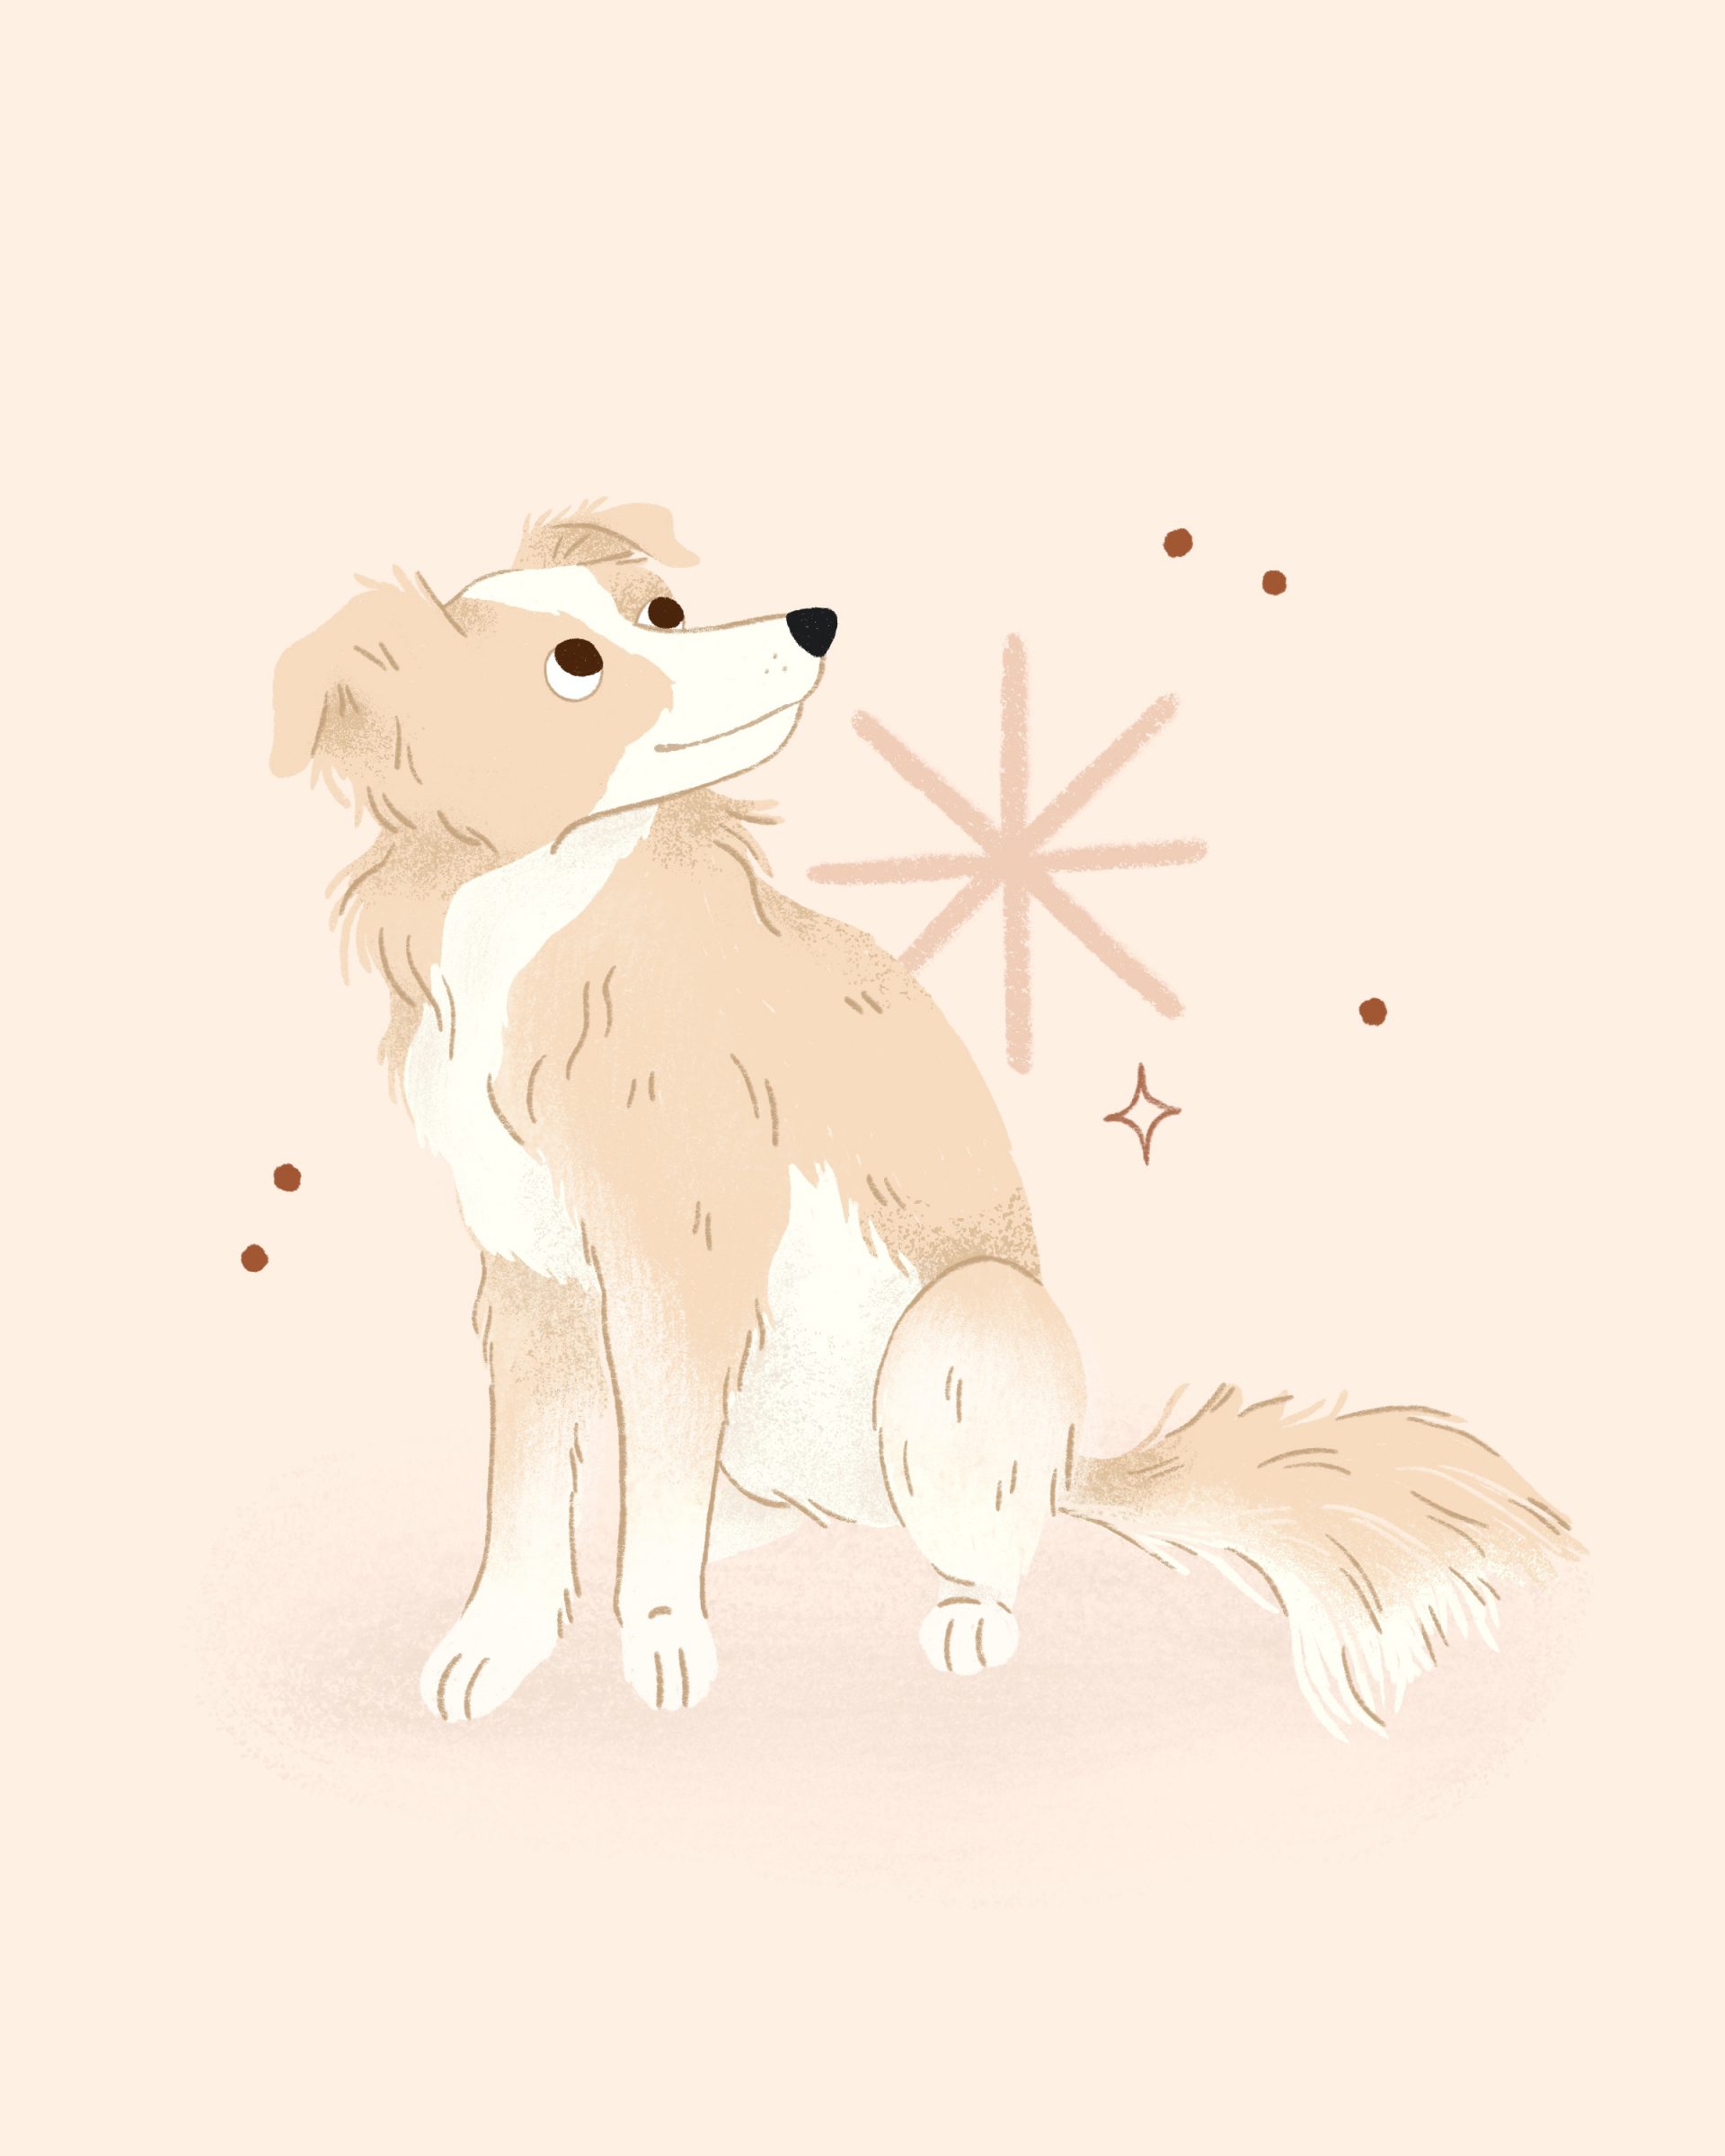 An illustrated portrait of a small floofy white and tan dog